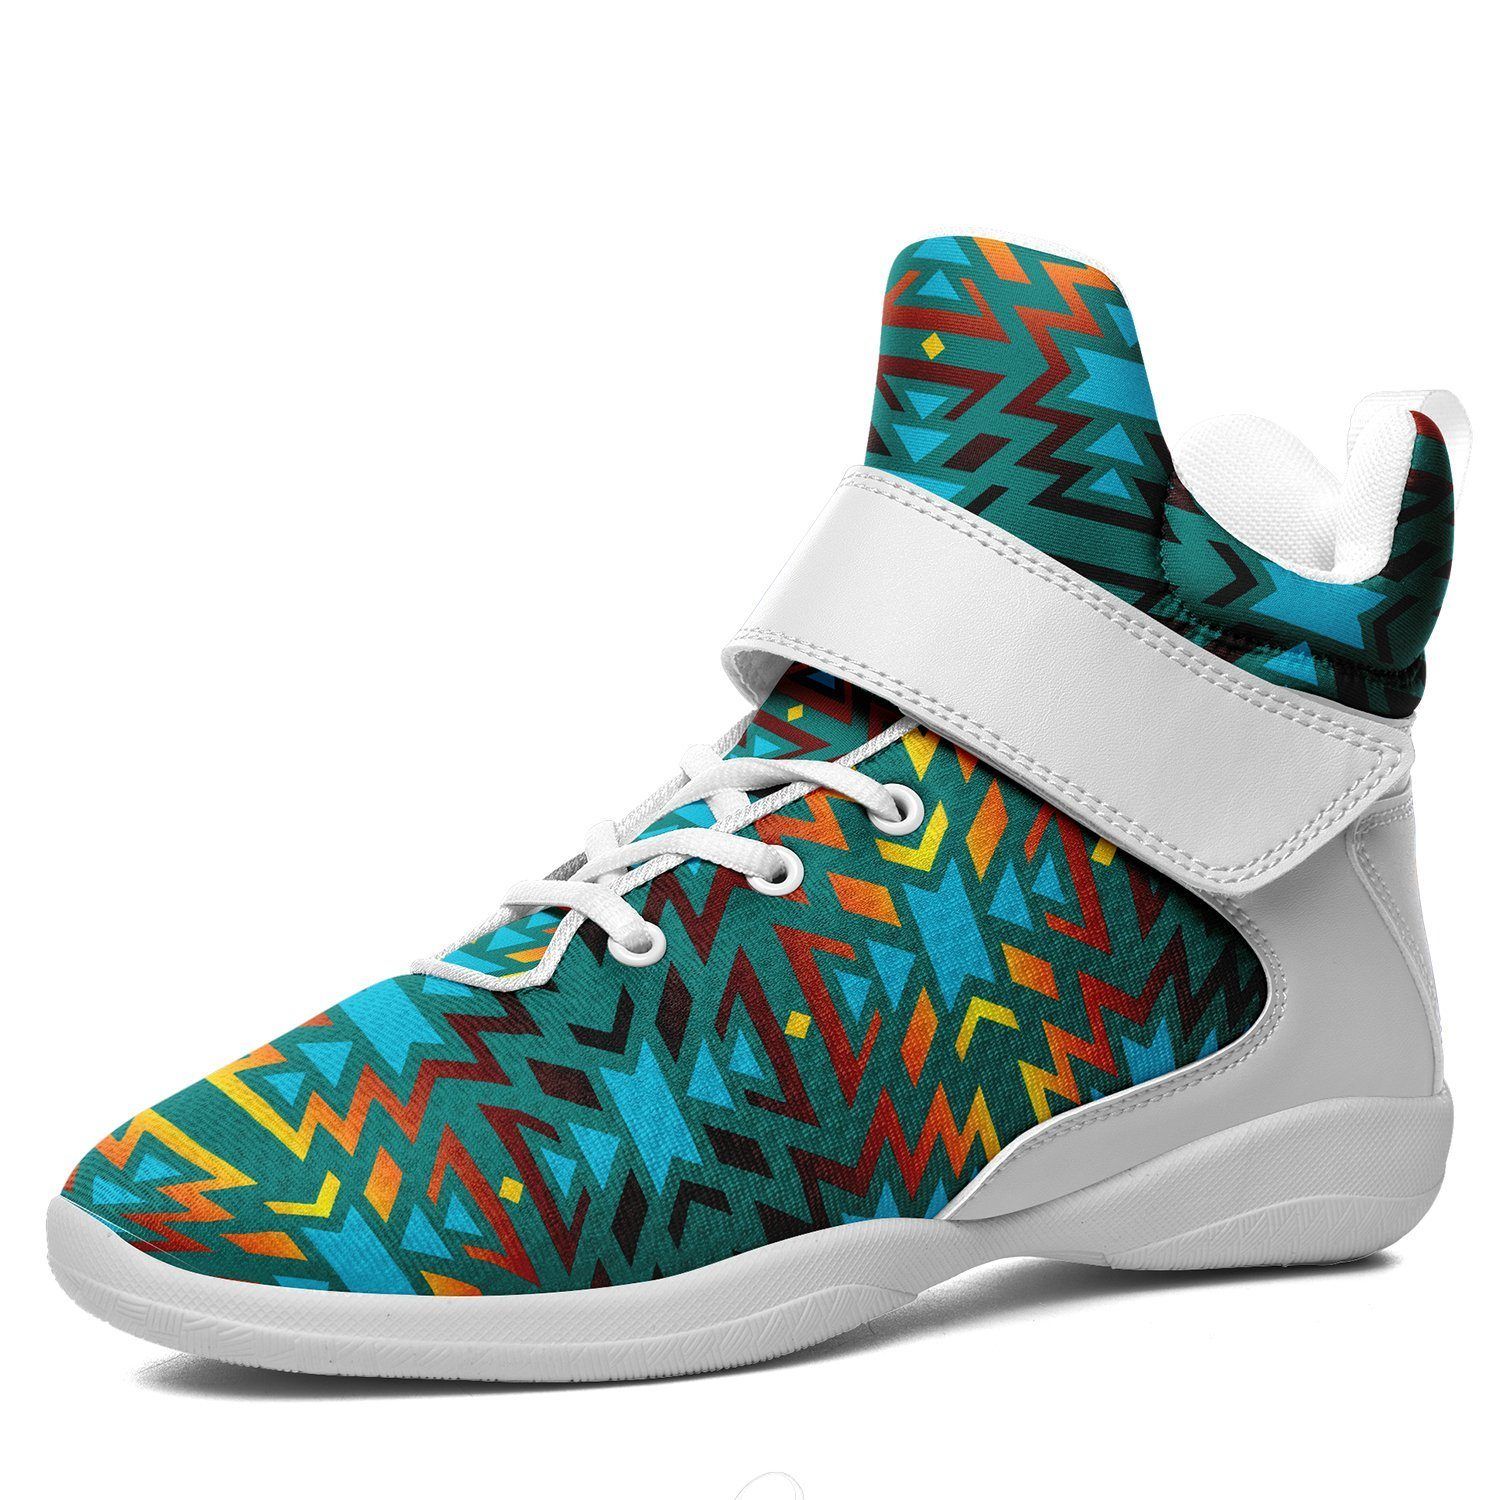 Fire Colors and Turquoise Teal Ipottaa Basketball / Sport High Top Shoes - White Sole 49 Dzine US Men 7 / EUR 40 White Sole with White Strap 